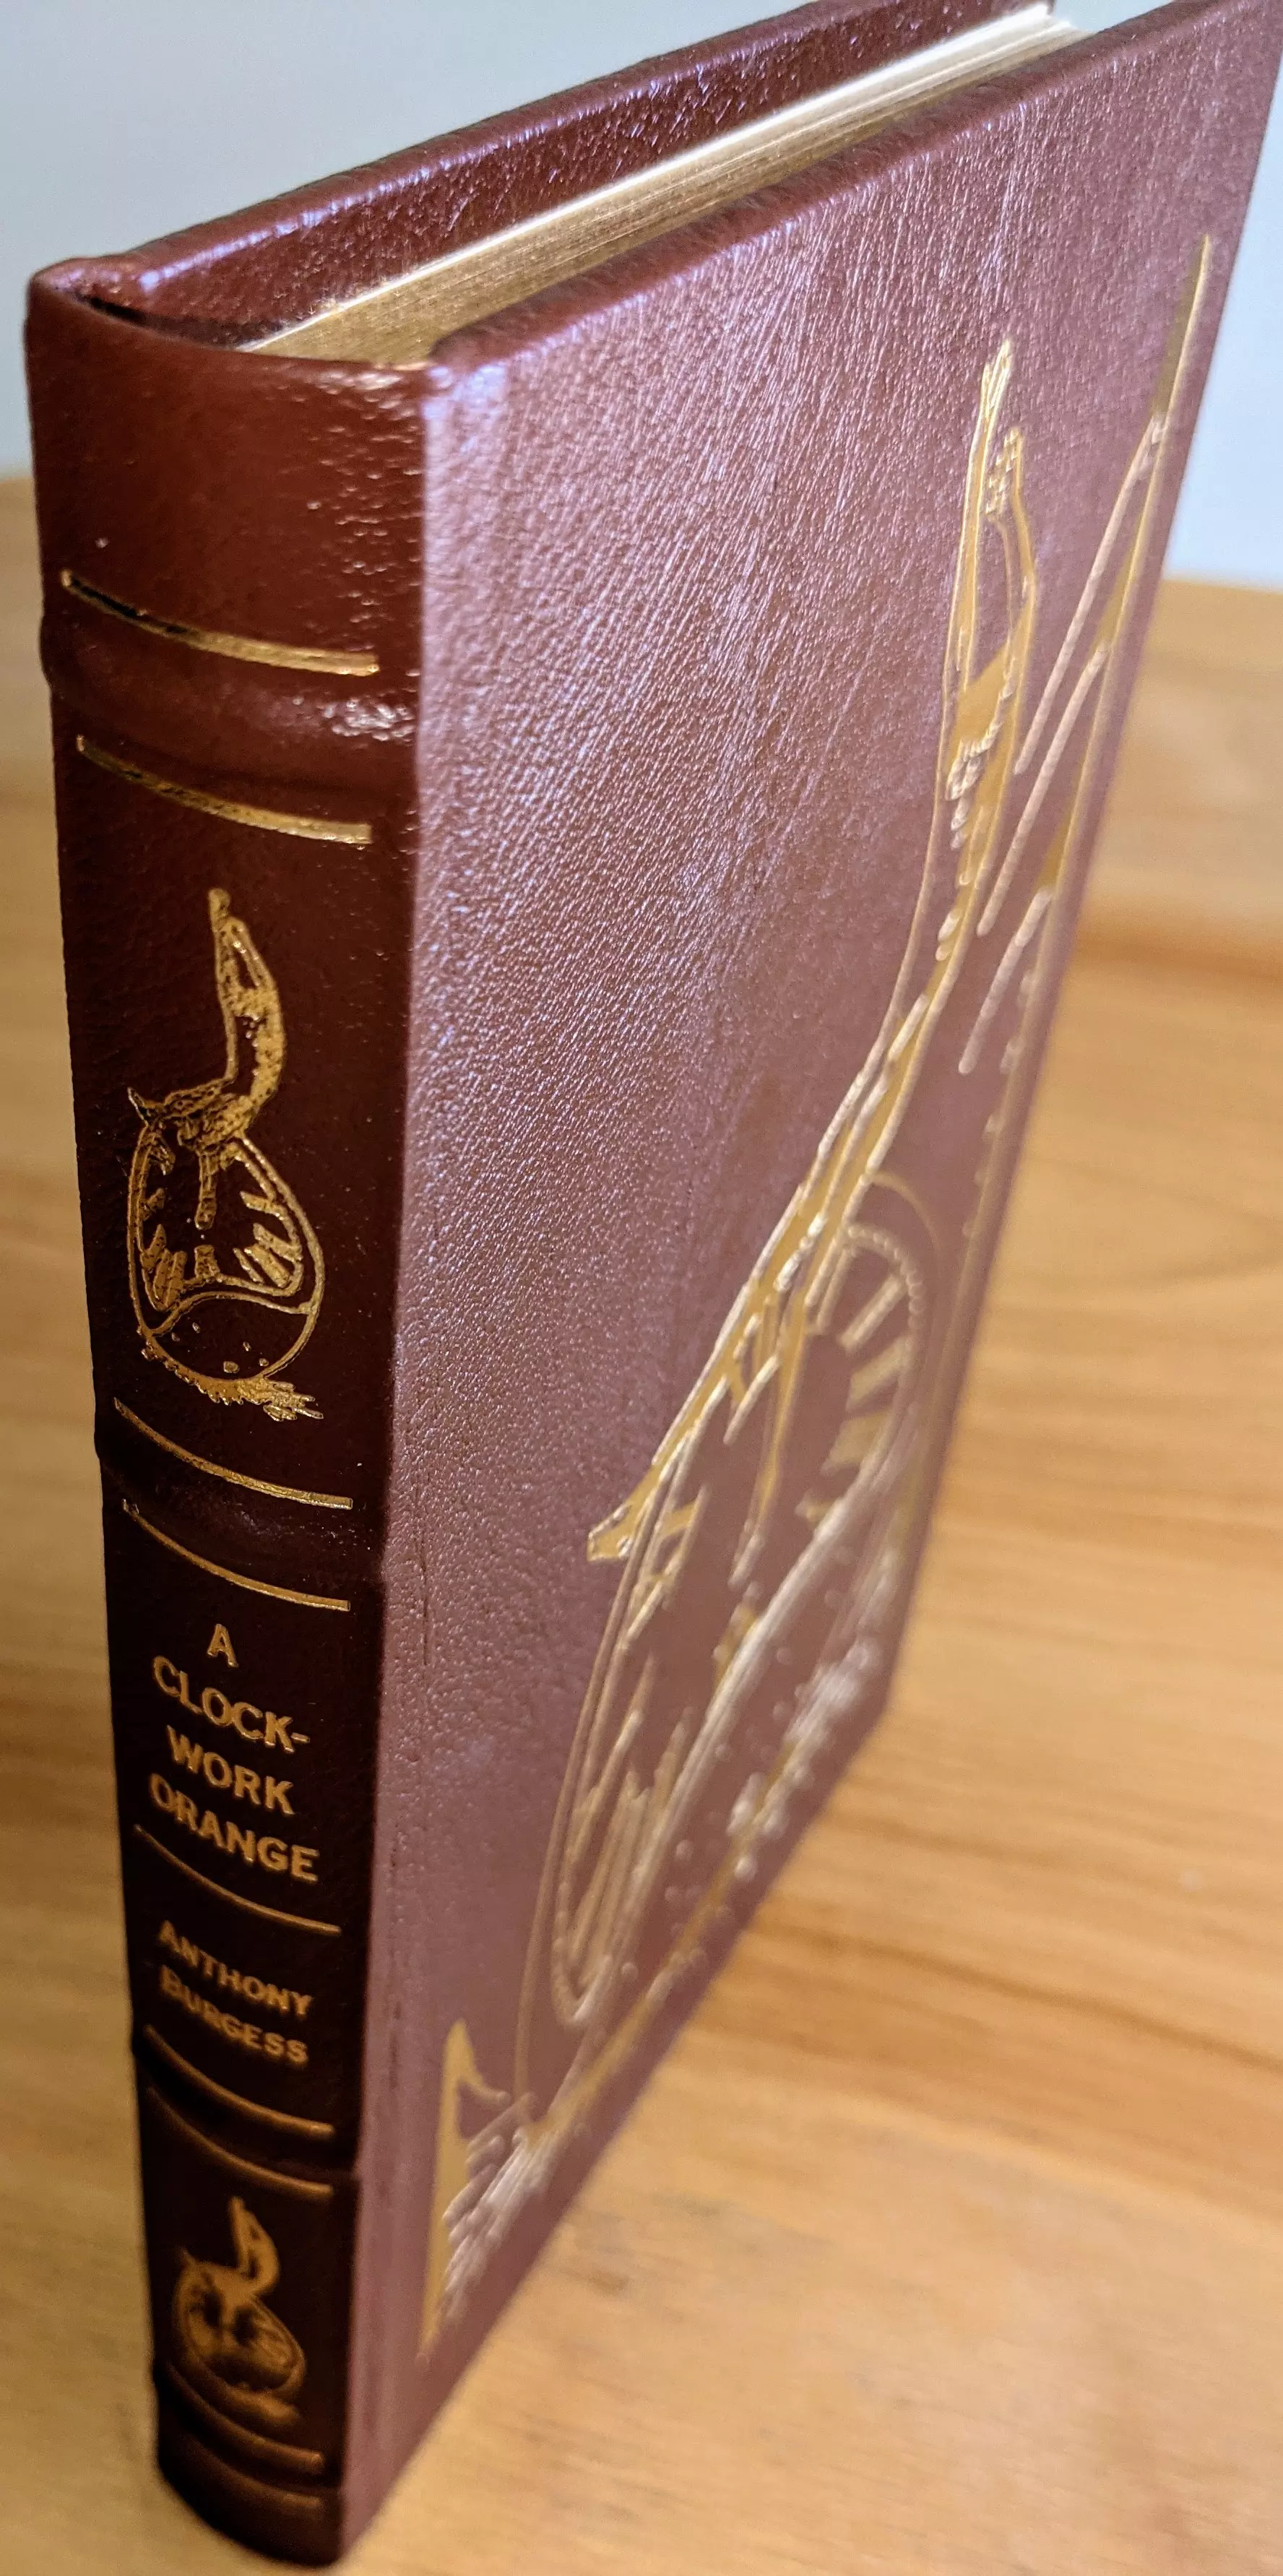 Stunning Brown Leather Bound hardback book with hubbed spine, cover artwork in 22kt gold, printed on archival paper with gold gilded edges, smyth sewing & concealed muslin joints
	  - original artwork by Ron Miller